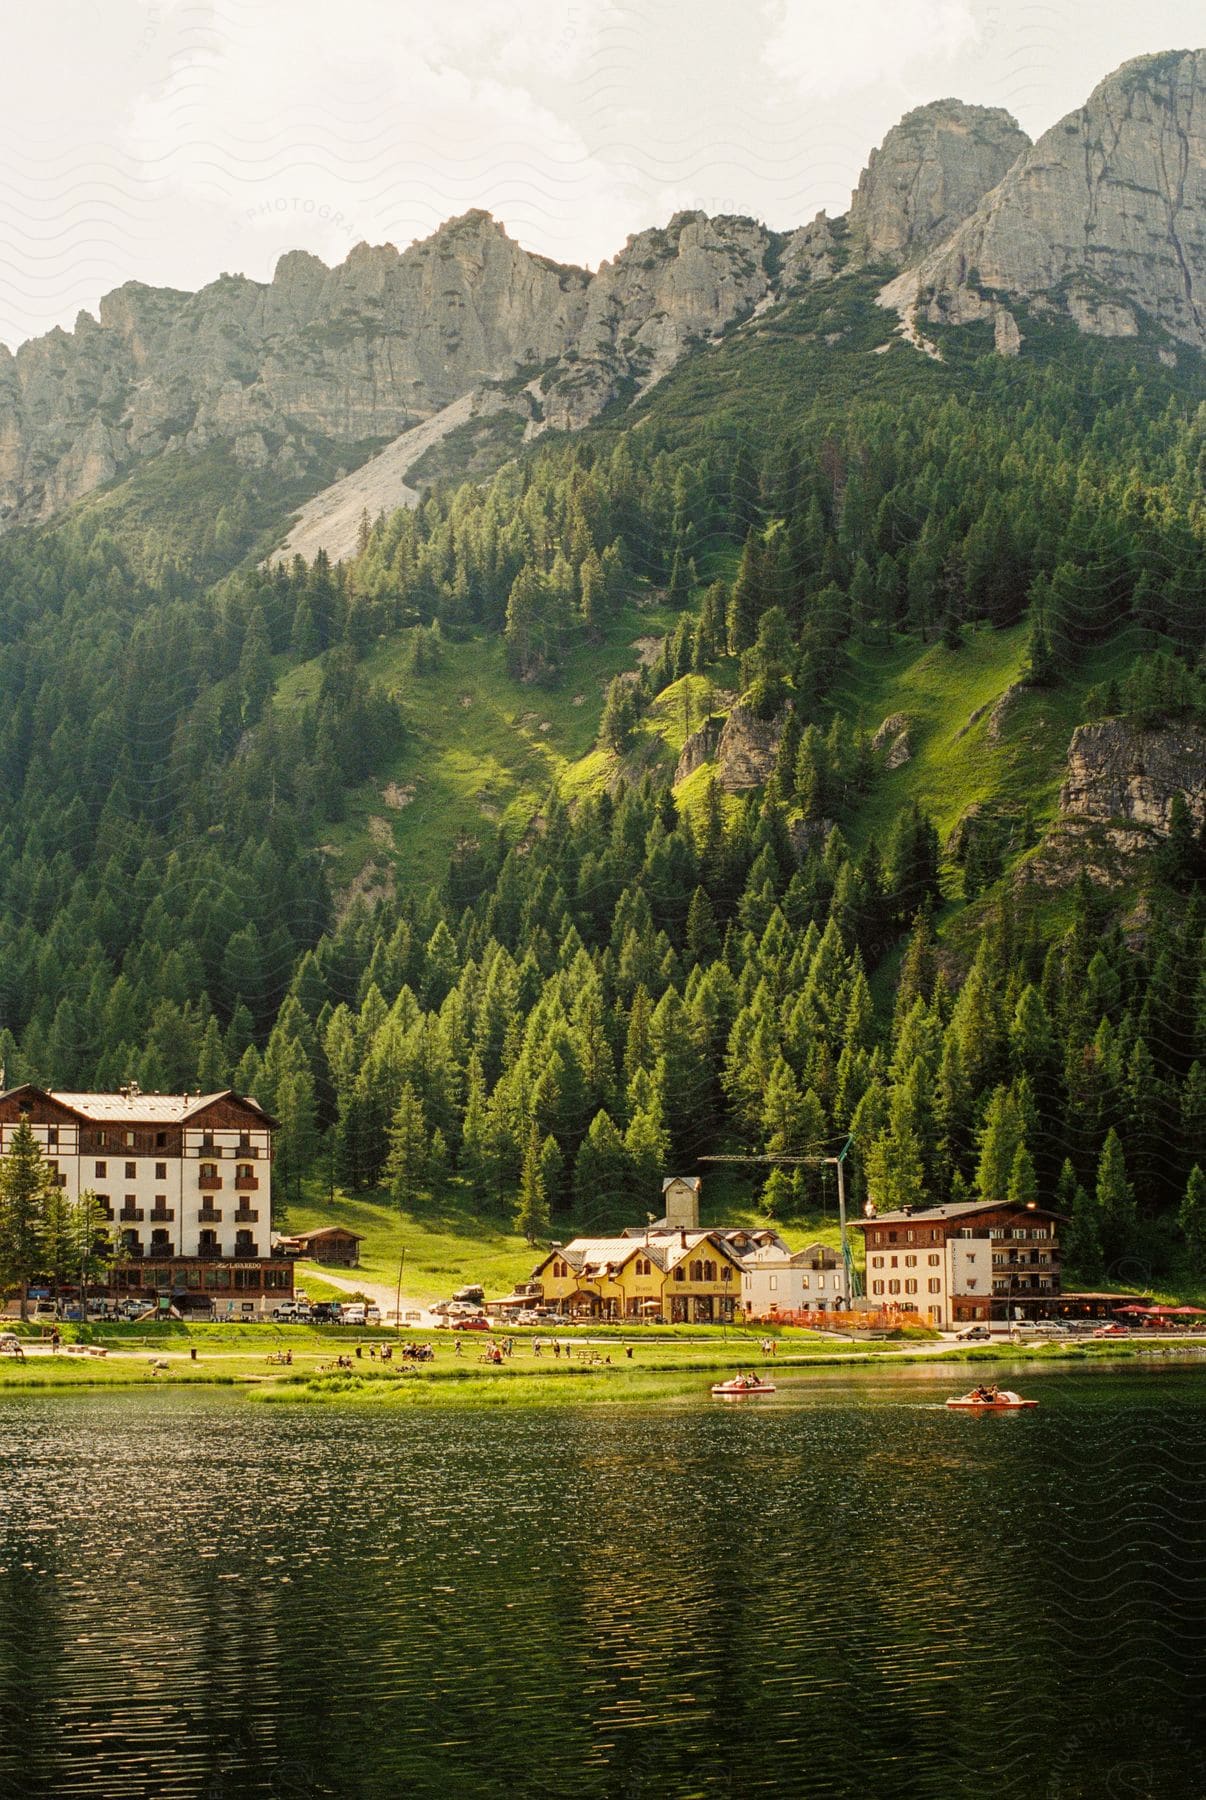 Buildings near massive mountains and a lake